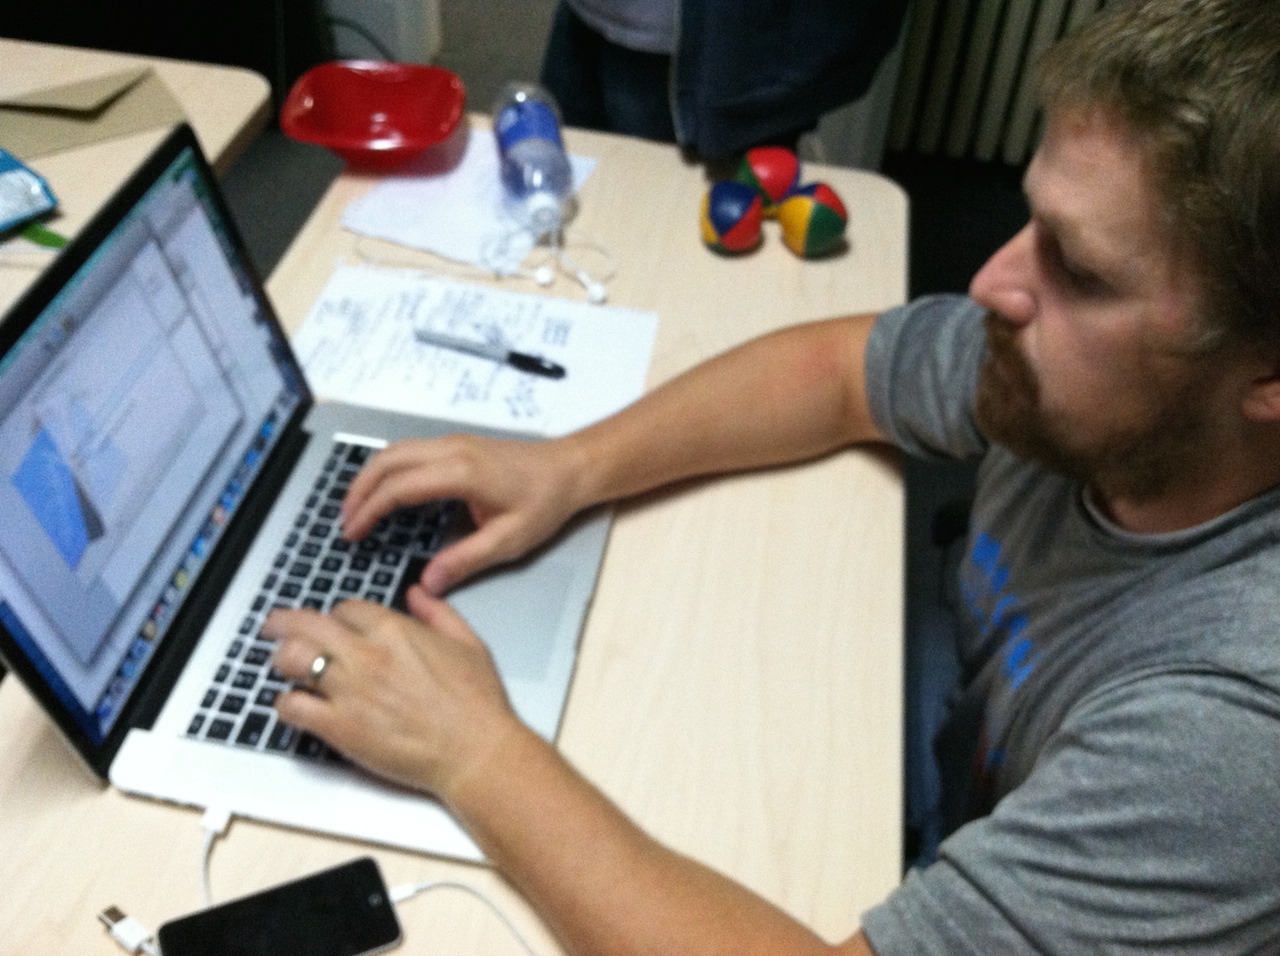 james-submitting-appstore-9-22-2013